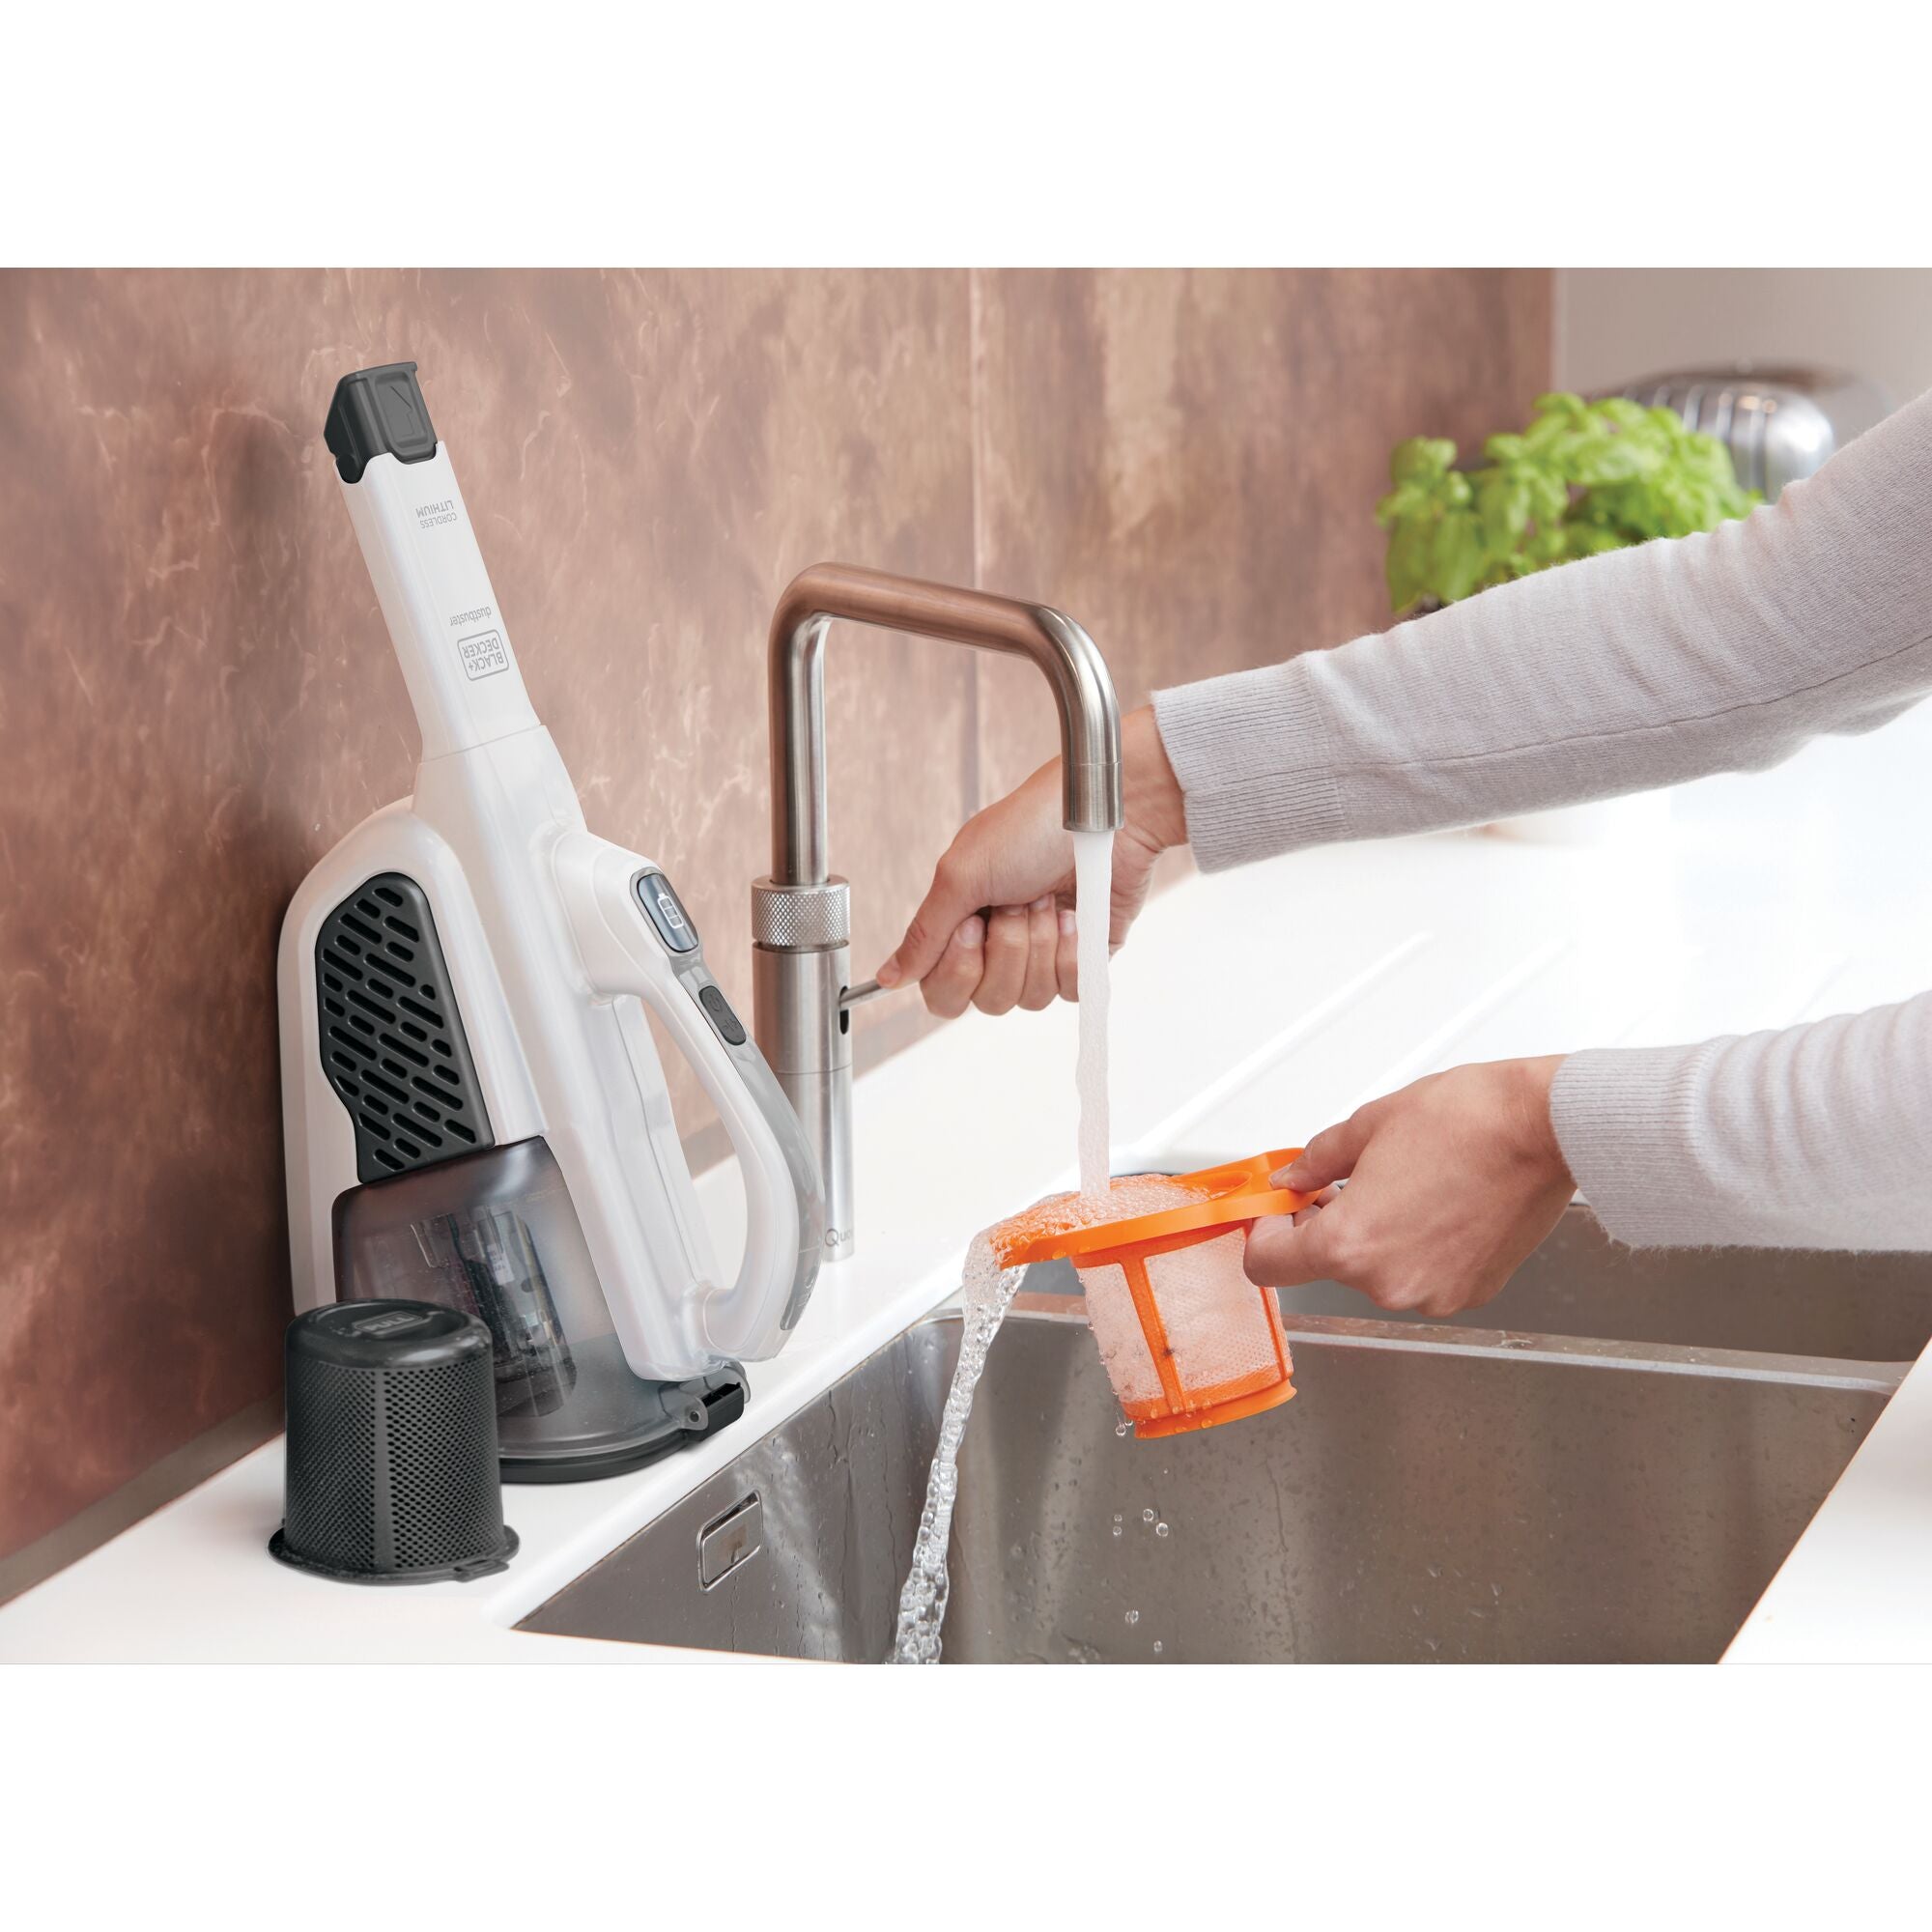 Dustbuster Cordless Hand Vacuum Advancedclean Slim With Charger, Filter And  Brush Crevice Tool